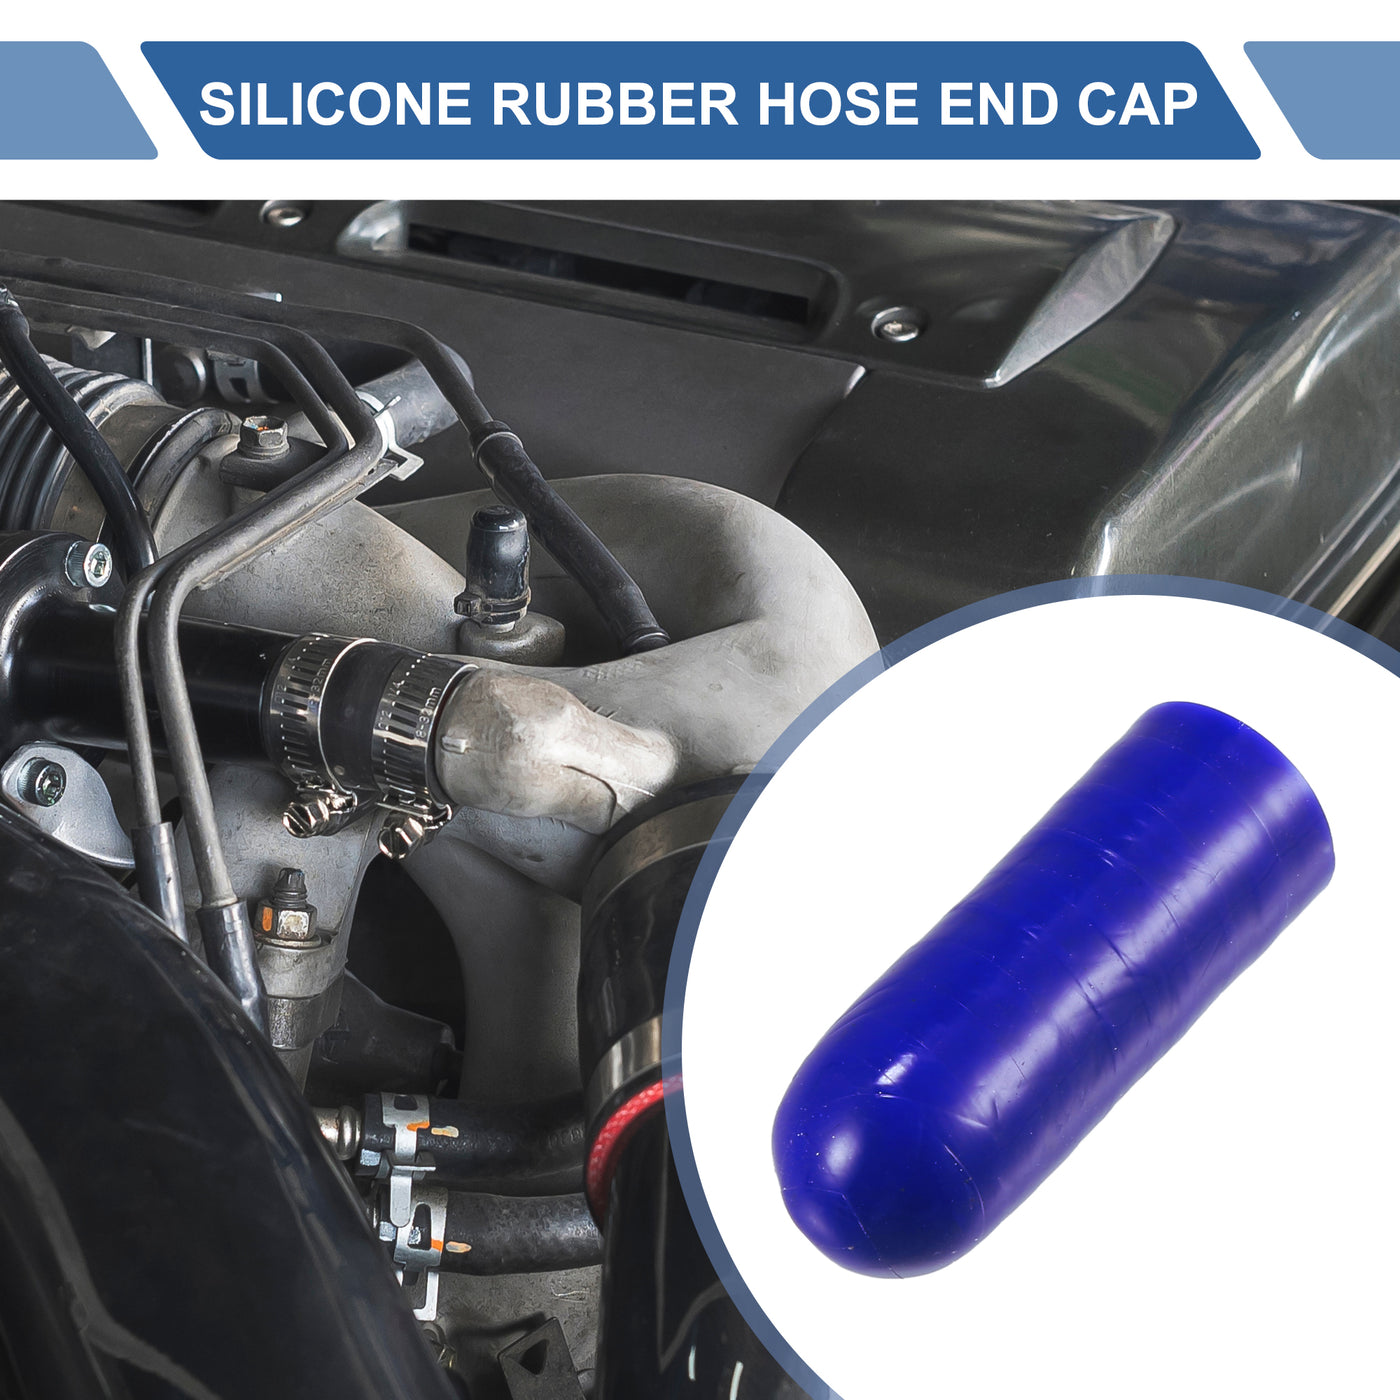 X AUTOHAUX 1 Pcs 30mm Length 8mm/0.31" ID Blue Red Car Silicone Rubber Hose End Cap with Clamps Silicone Reinforced Blanking Cap for Bypass Tube Universal